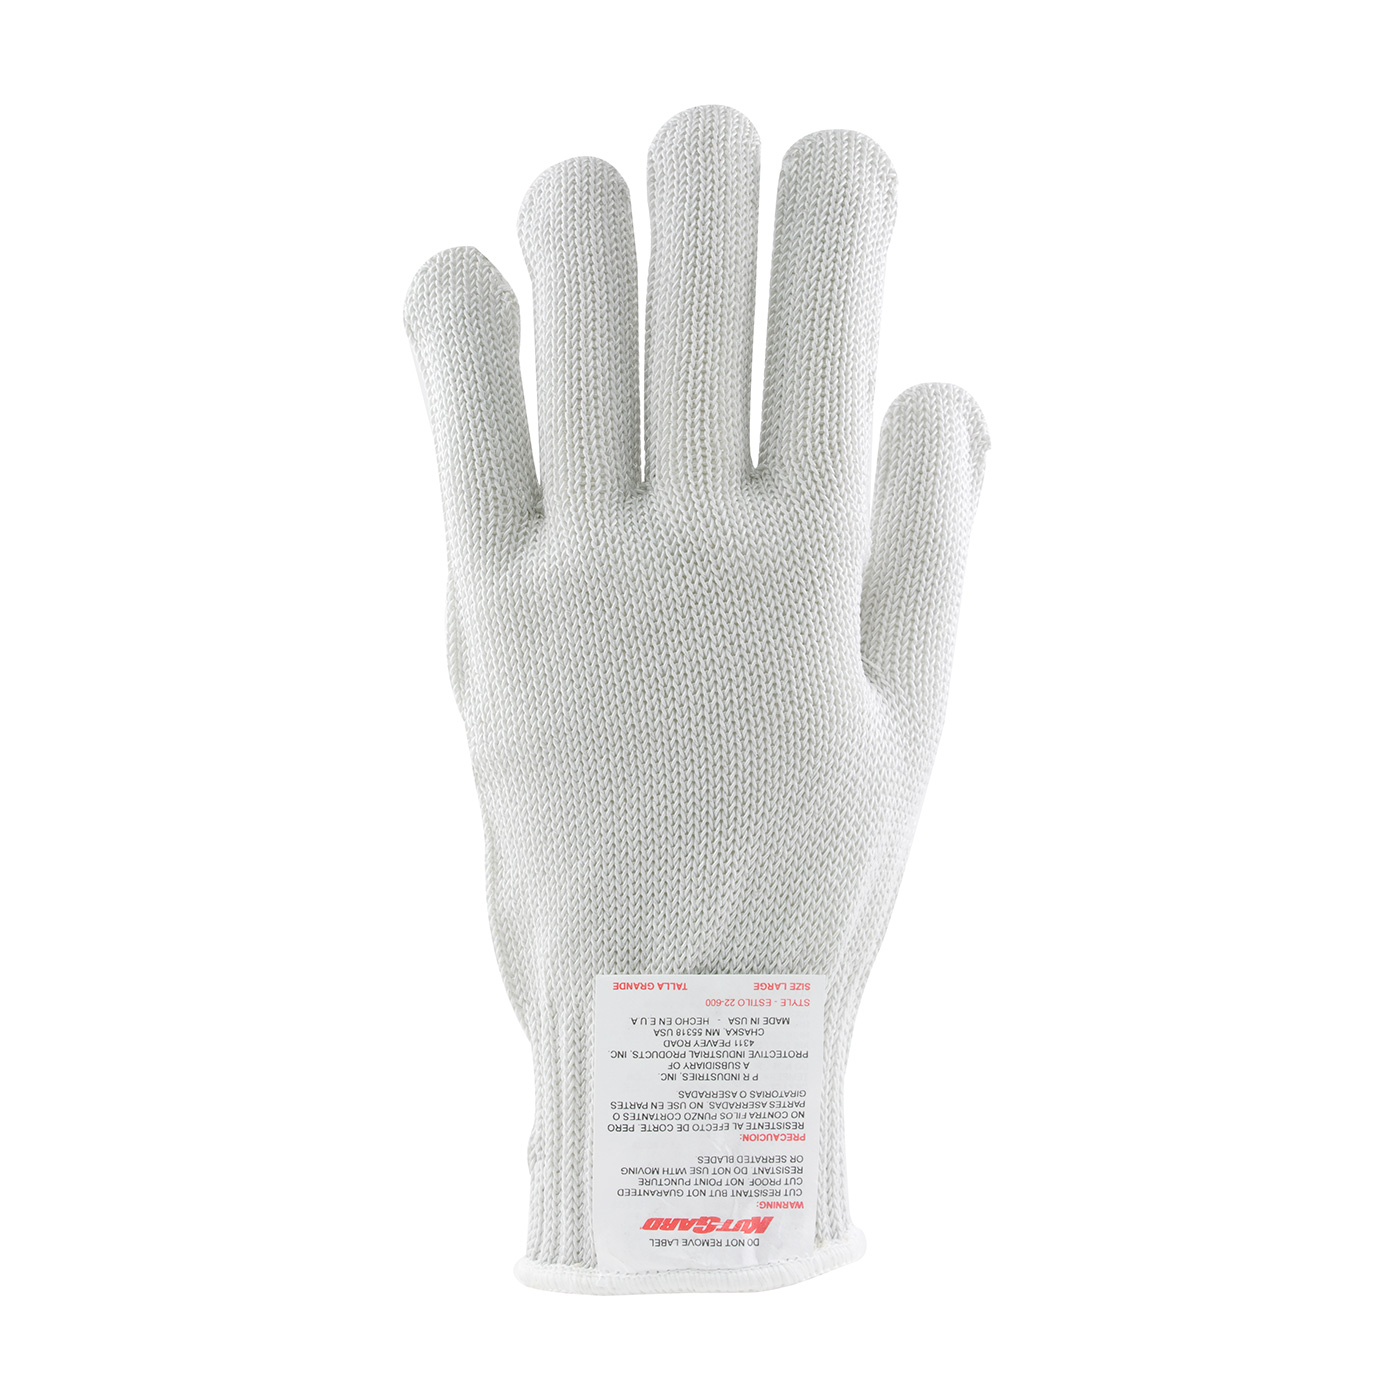 22 - 600 PIP爪盖®无缝针织烯烃纤维®Blended Antimicrobial Glove - Heavy Weight